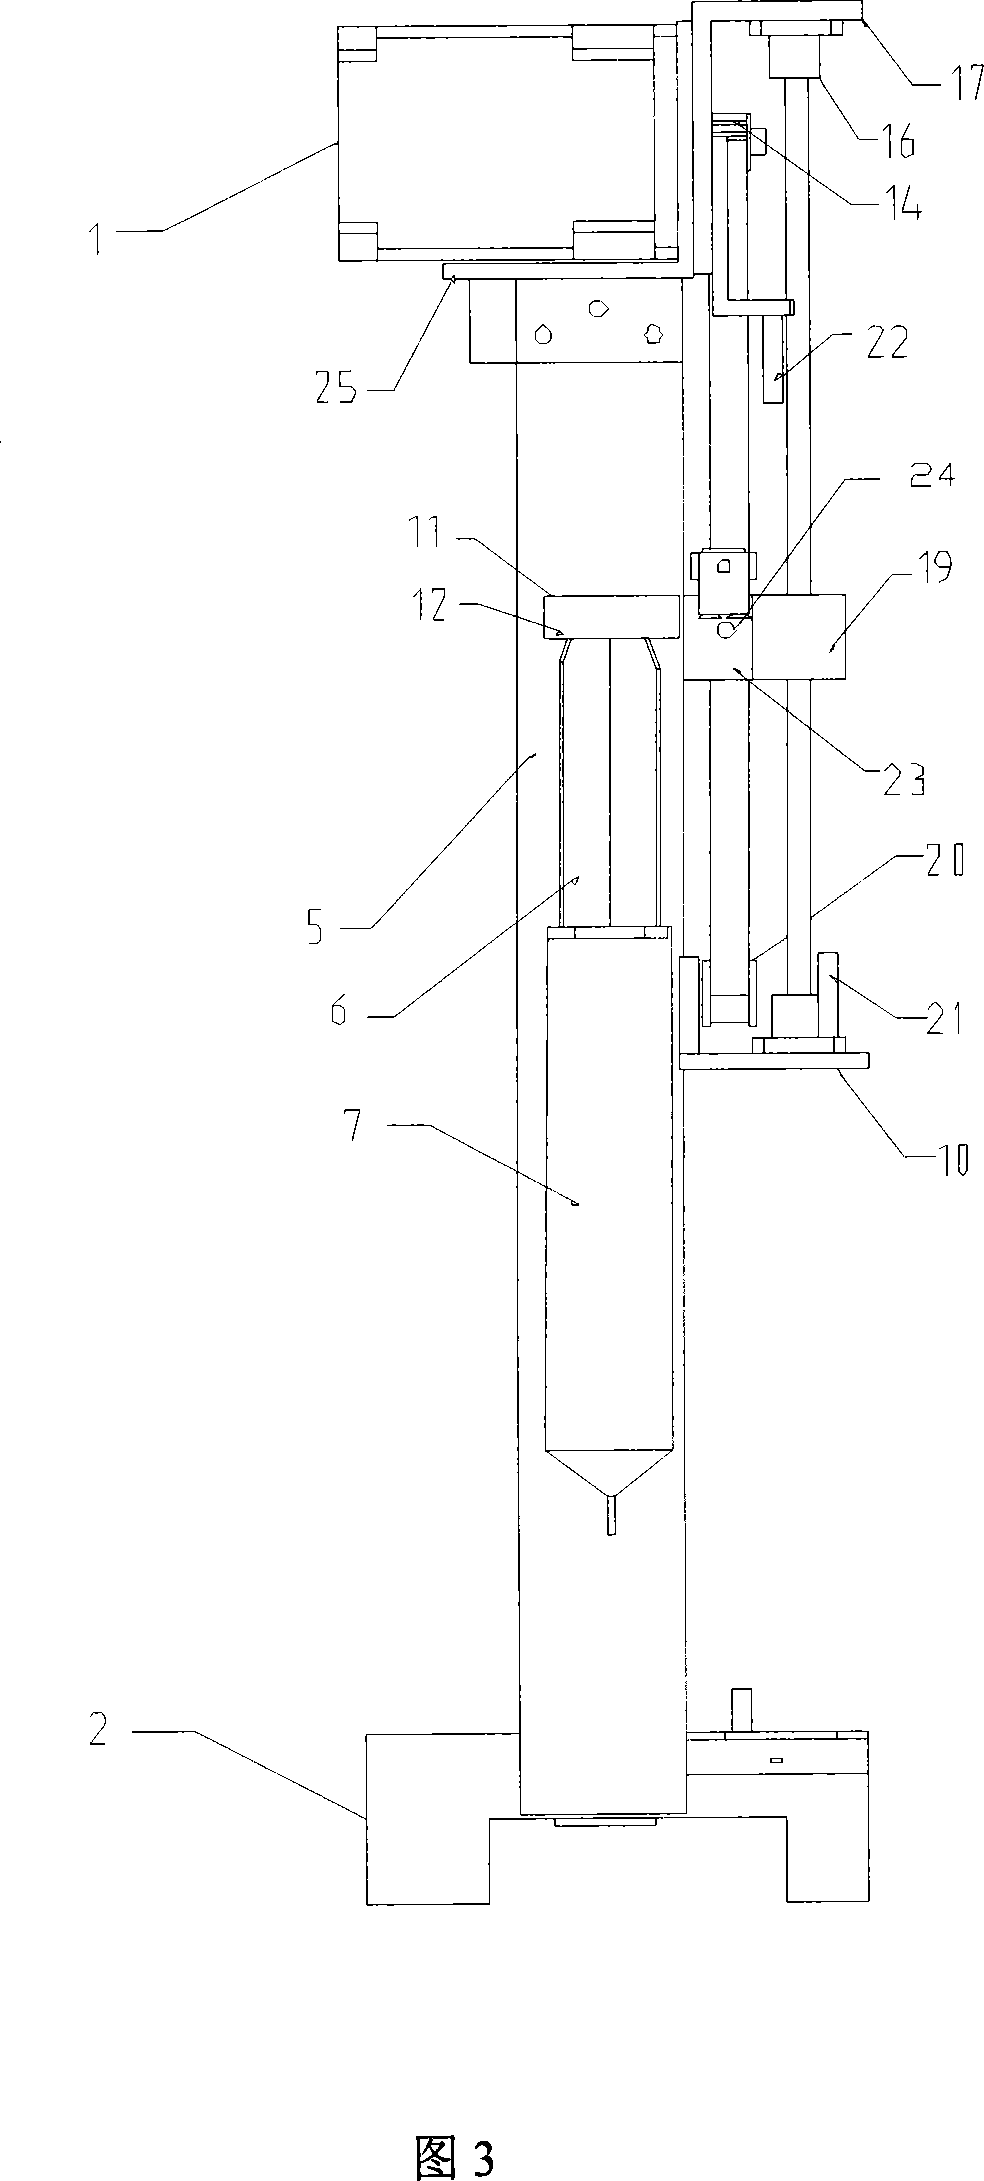 Medicine formulation automatic drawing out and infusion device for clinical pharmaceutics